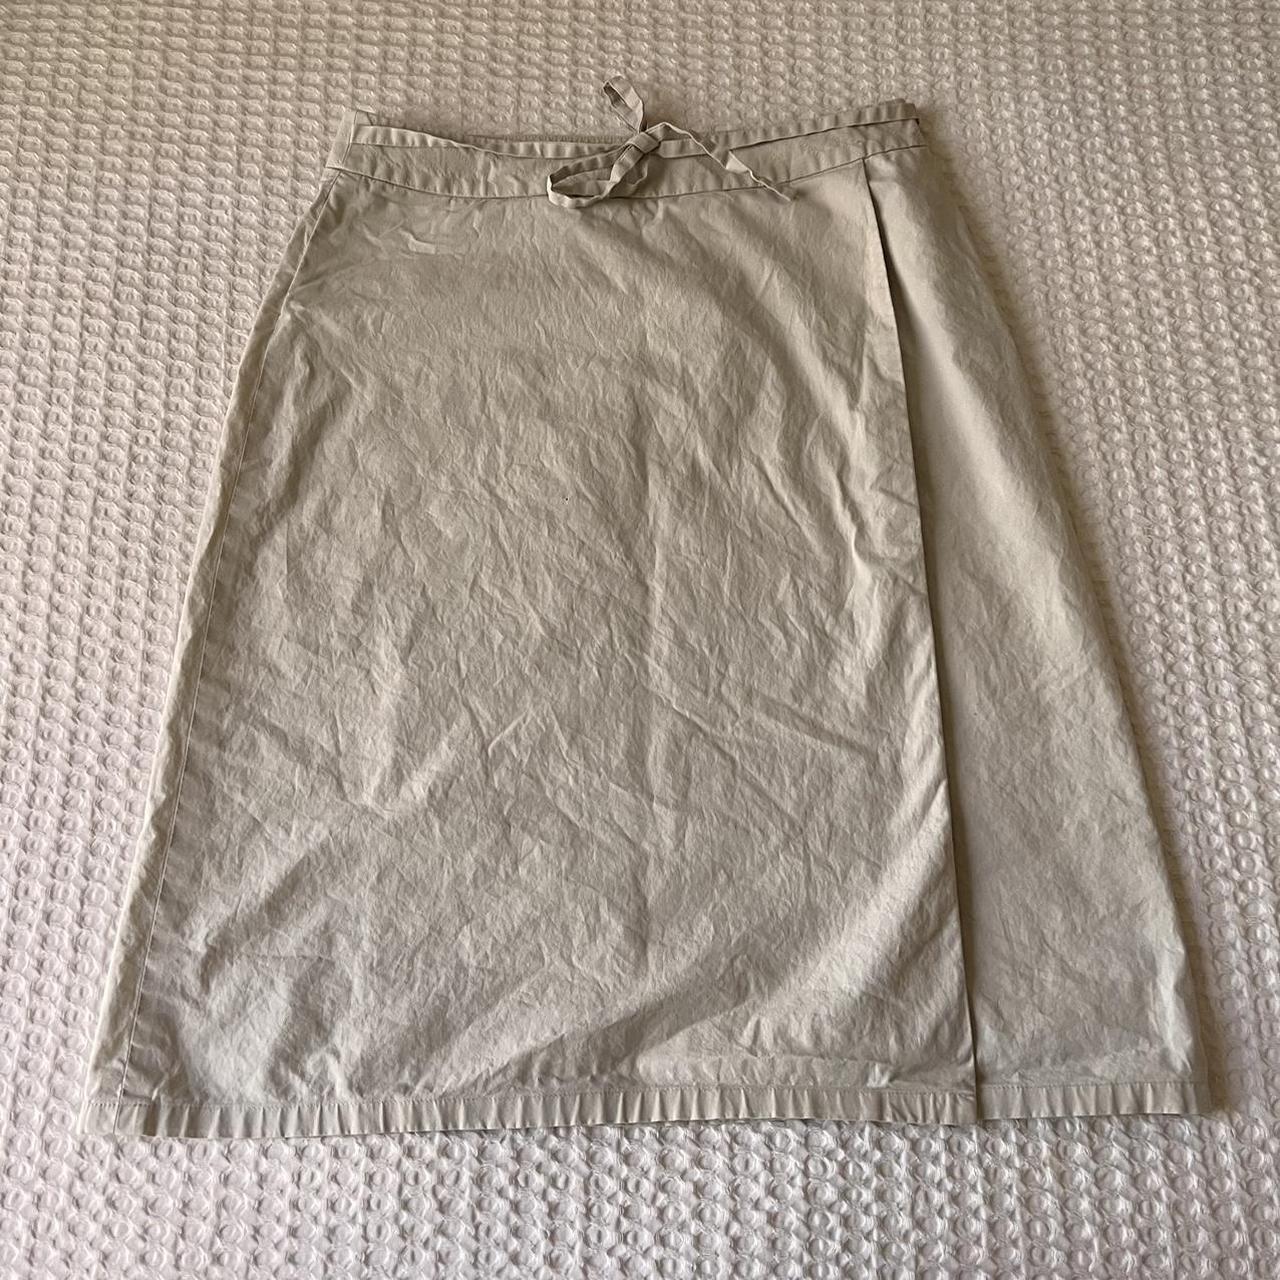 Cream midi skirt by Halogen -tiny hole in the... - Depop